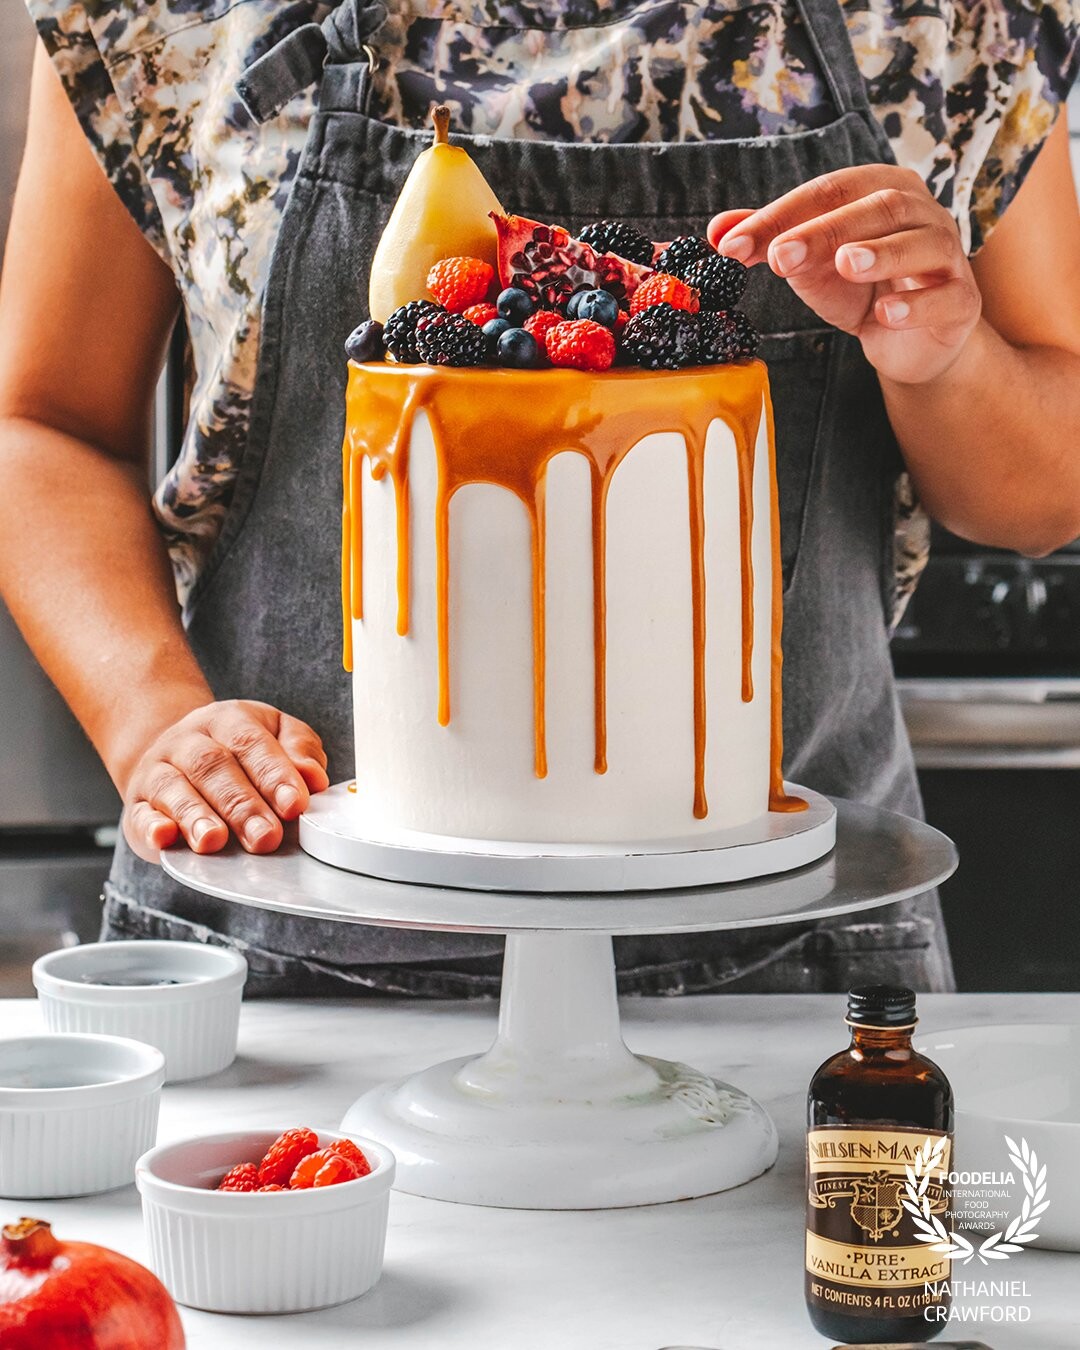 This is a capture from a recent client photoshoot for Nielsen-Massey Vanillas. Jessica of Jessica's Dessert Studio (in Chicago, IL) was brought in to build and decorate this layered cake, adorned with fresh fruit, poached pear, and dripping caramel sauce.